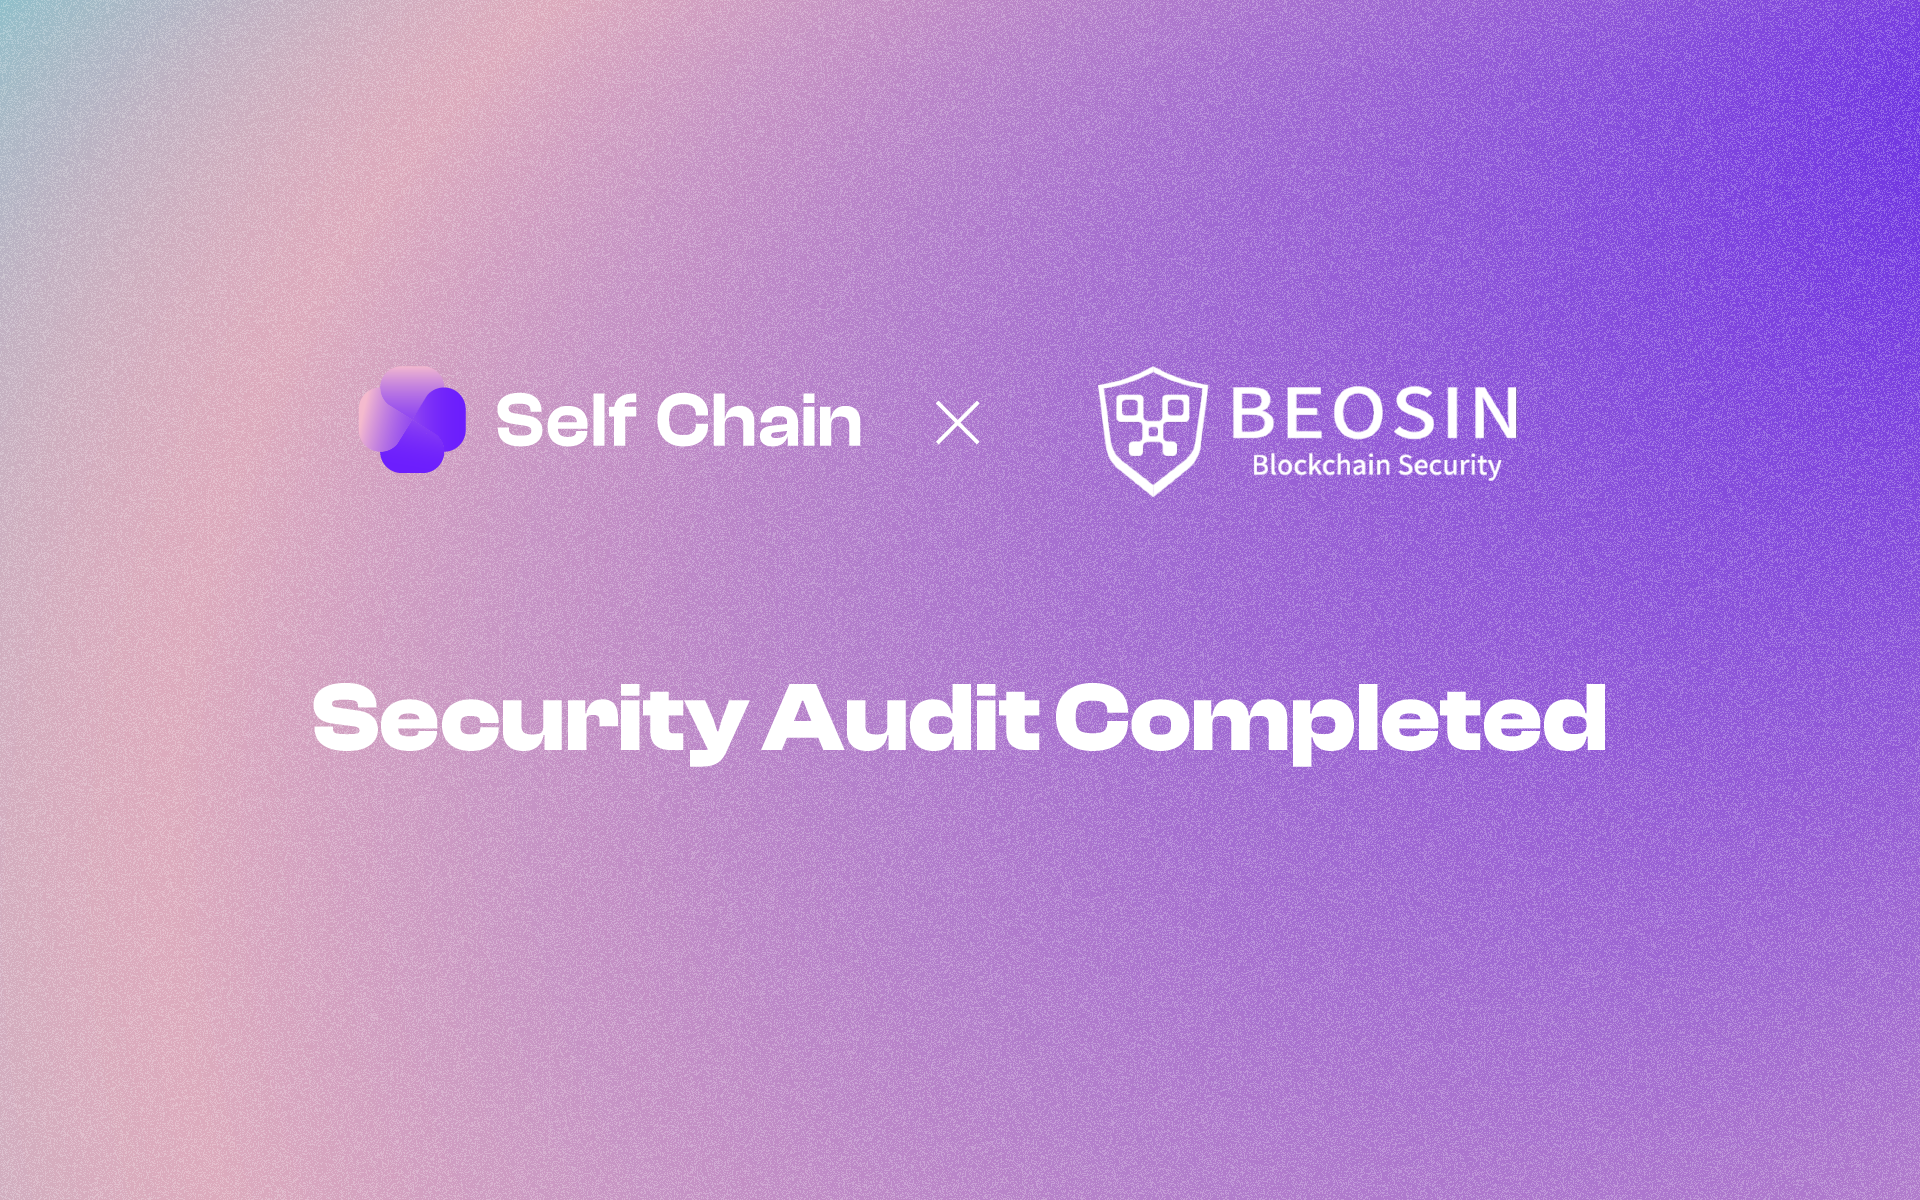 Self Chain Completes Security Audit with Beosin: A Milestone Towards Our Mainnet Launch